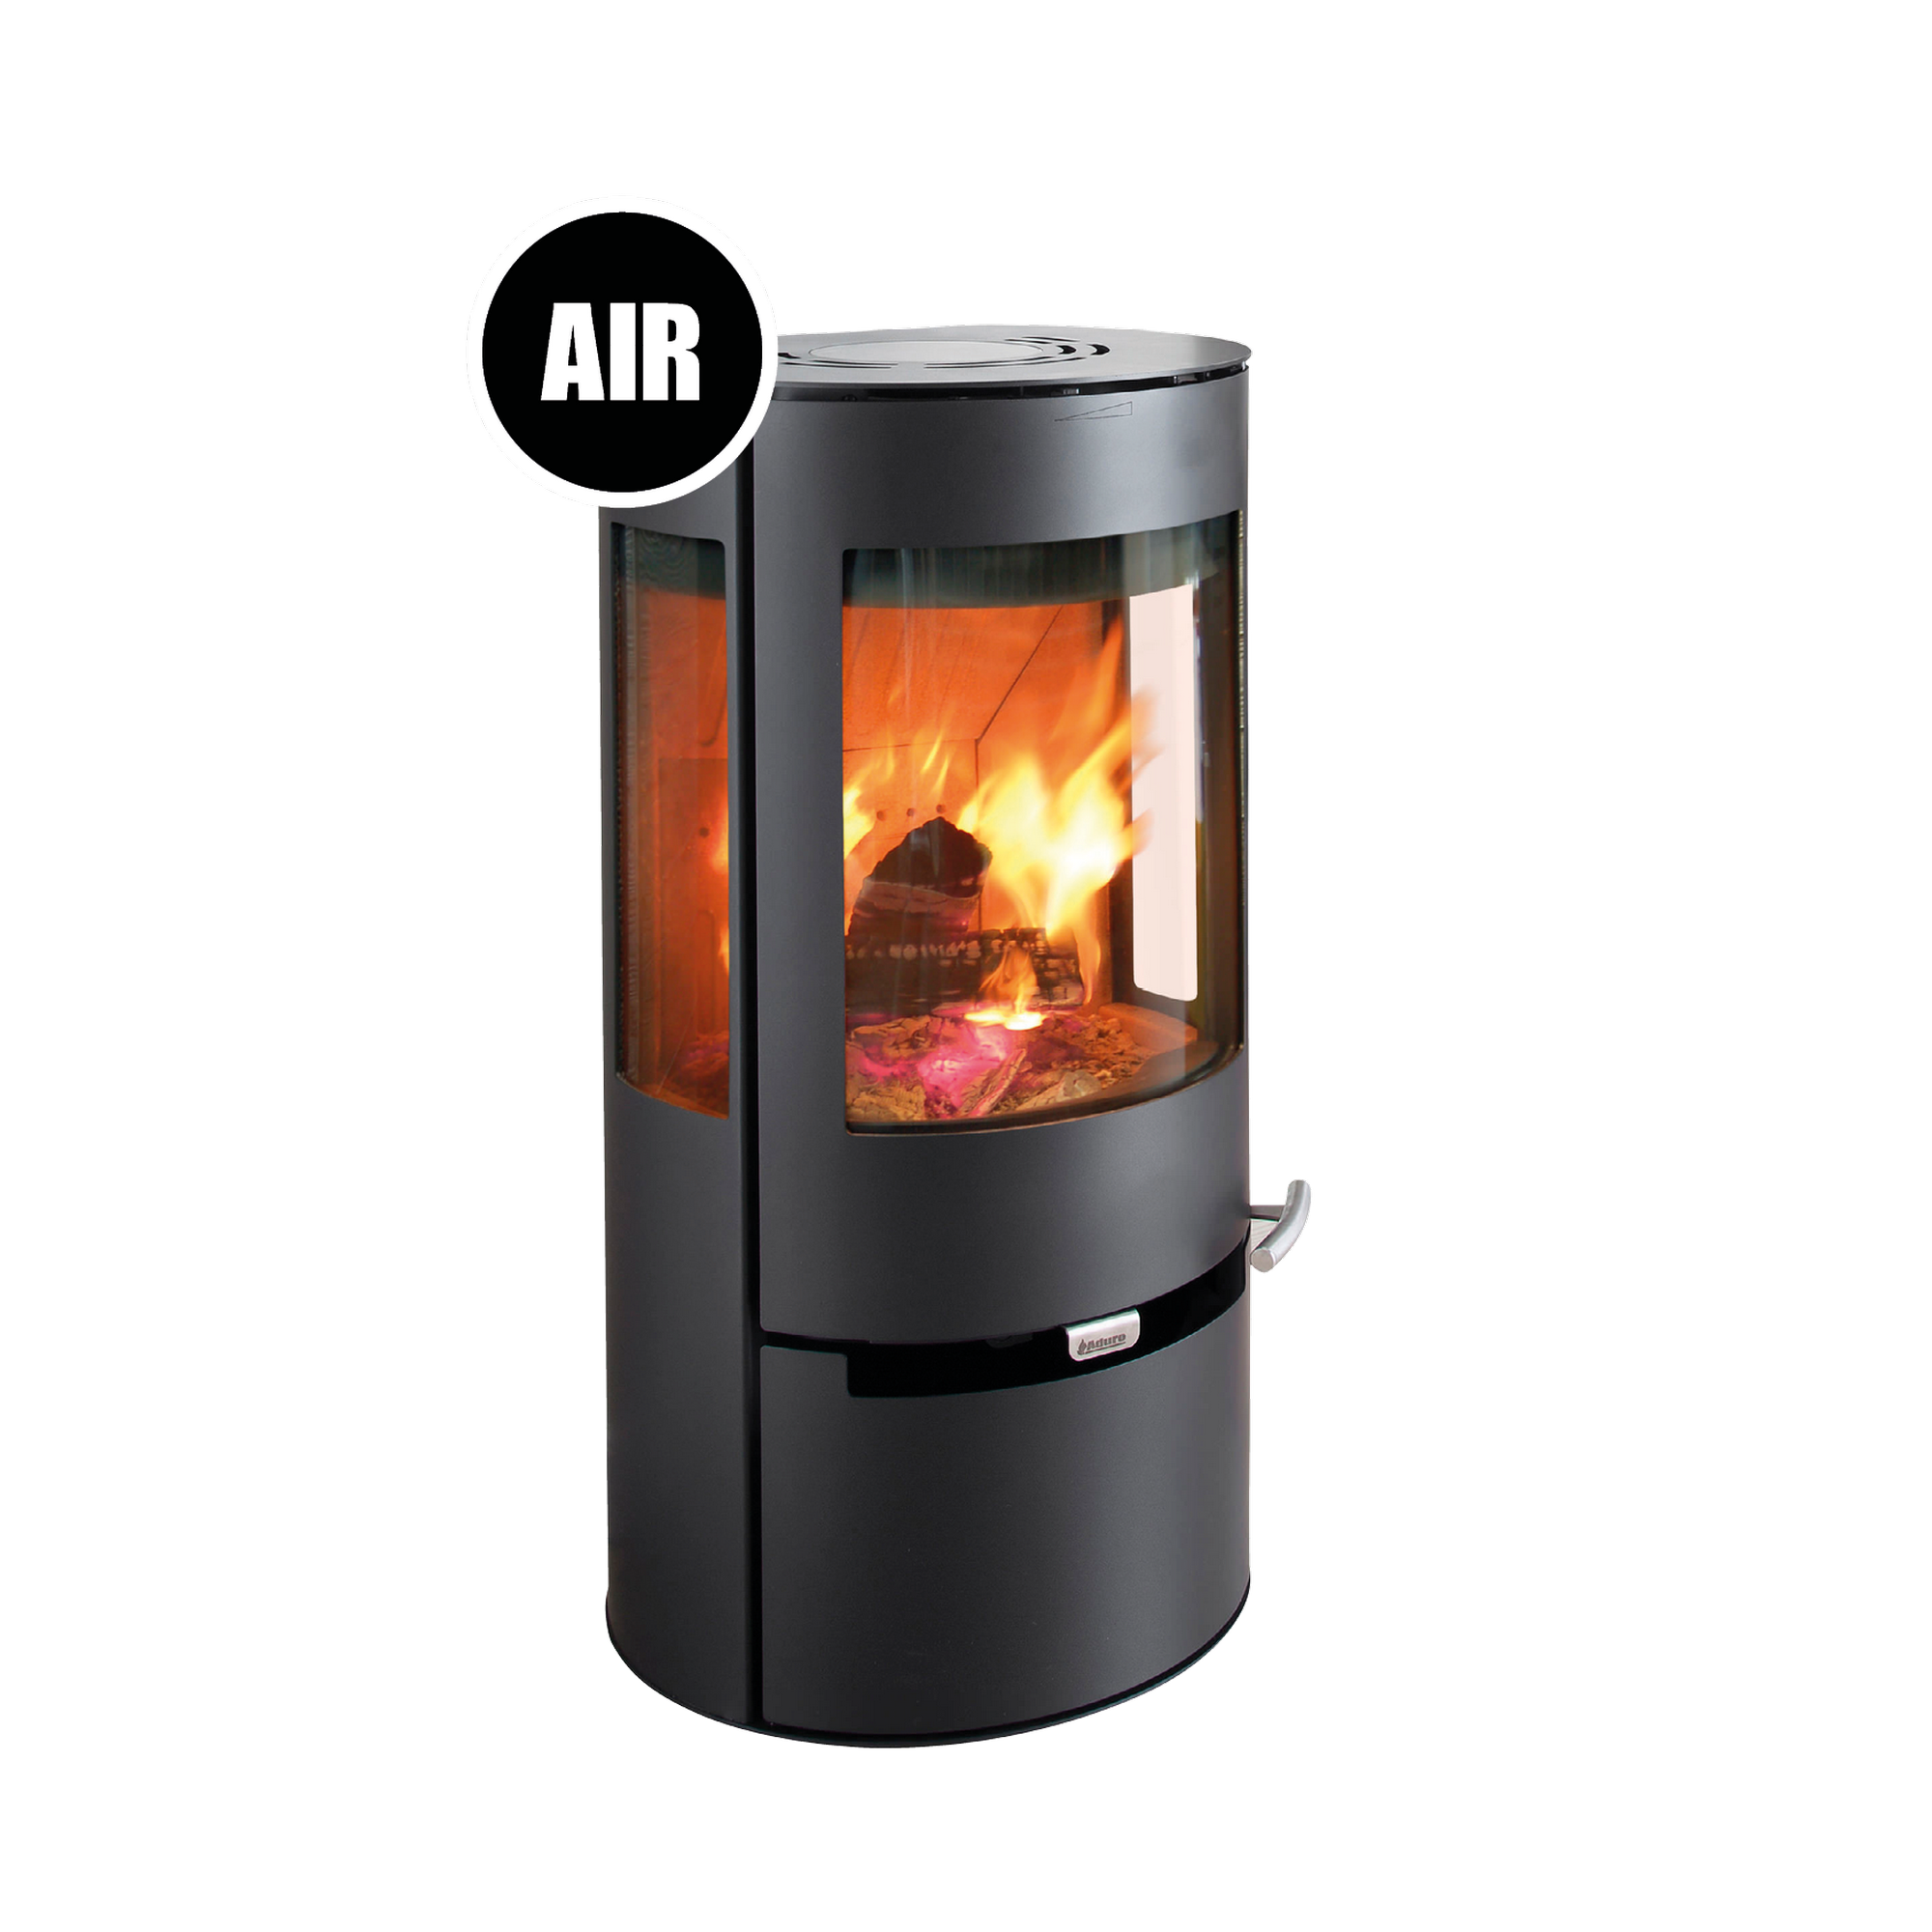 Kaminofen '9 air' Stahl 6 kW + product picture